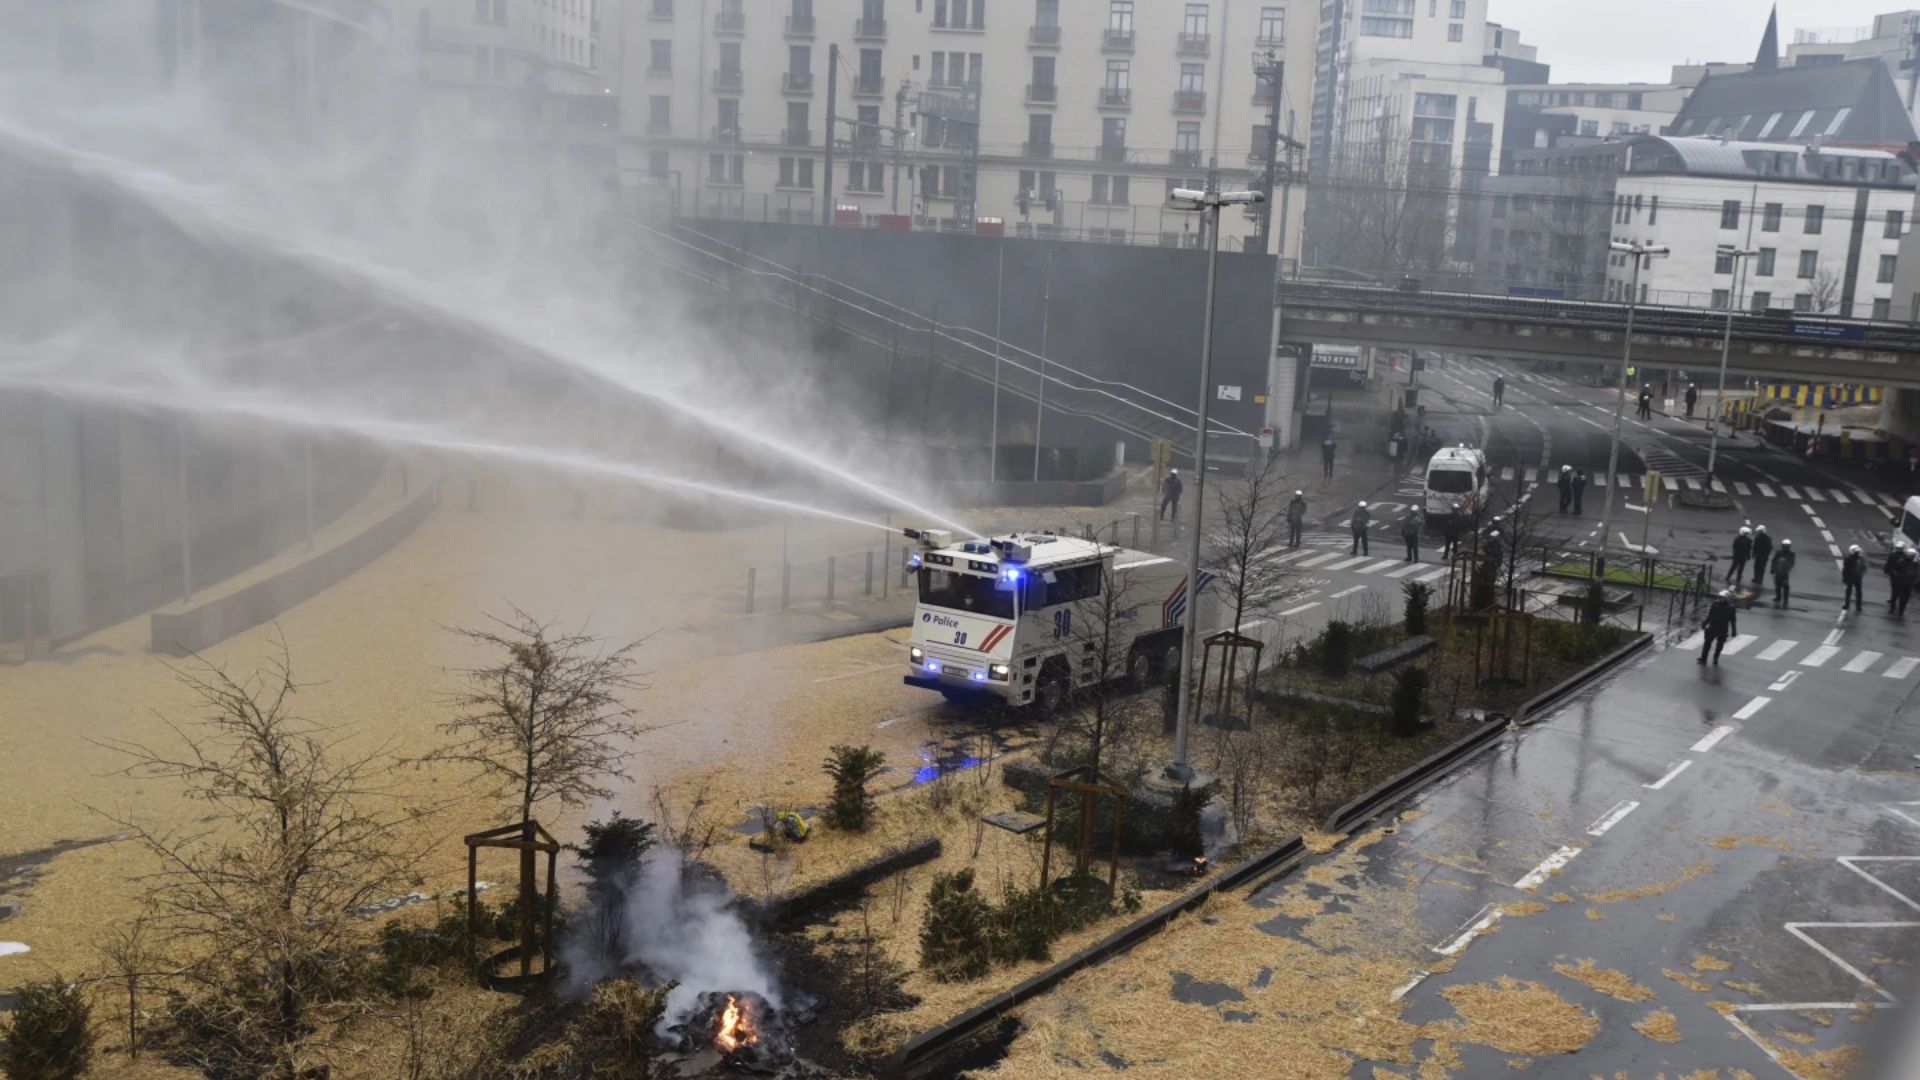 Farmers Protests in Brussels, clashes with police near European Union’s headquarters